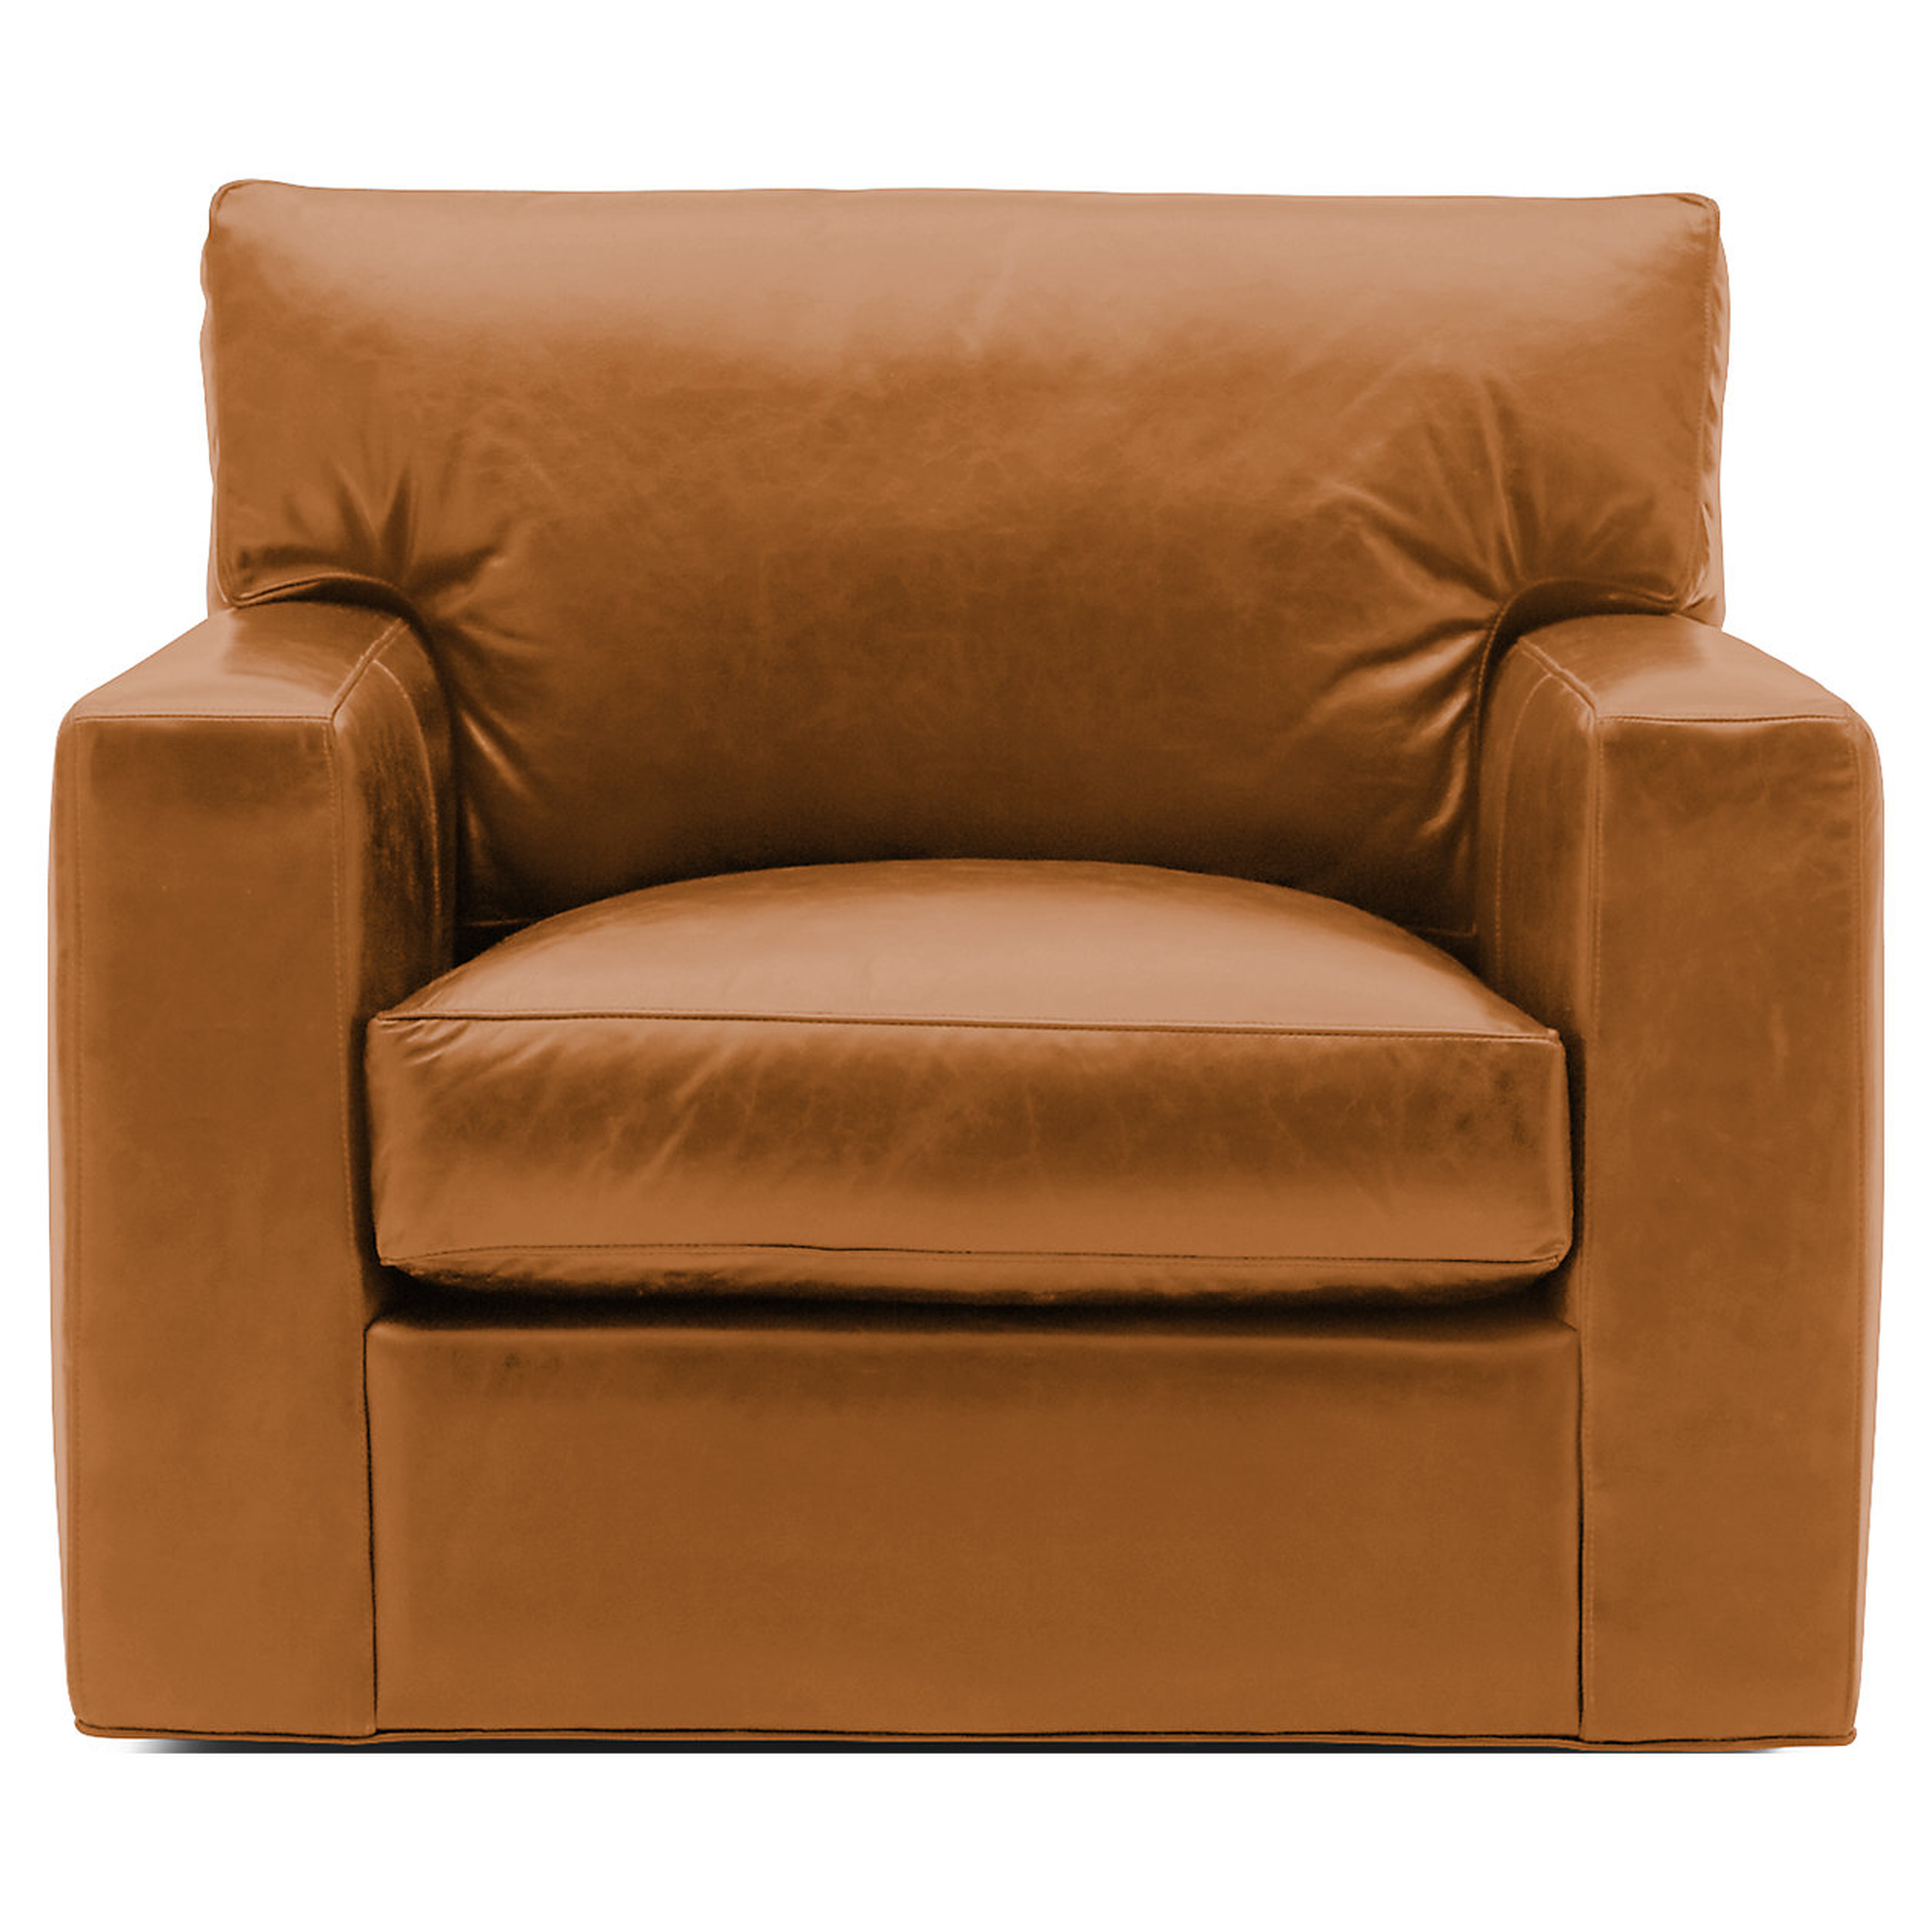 Axis Leather Swivel Chair - Crate and Barrel